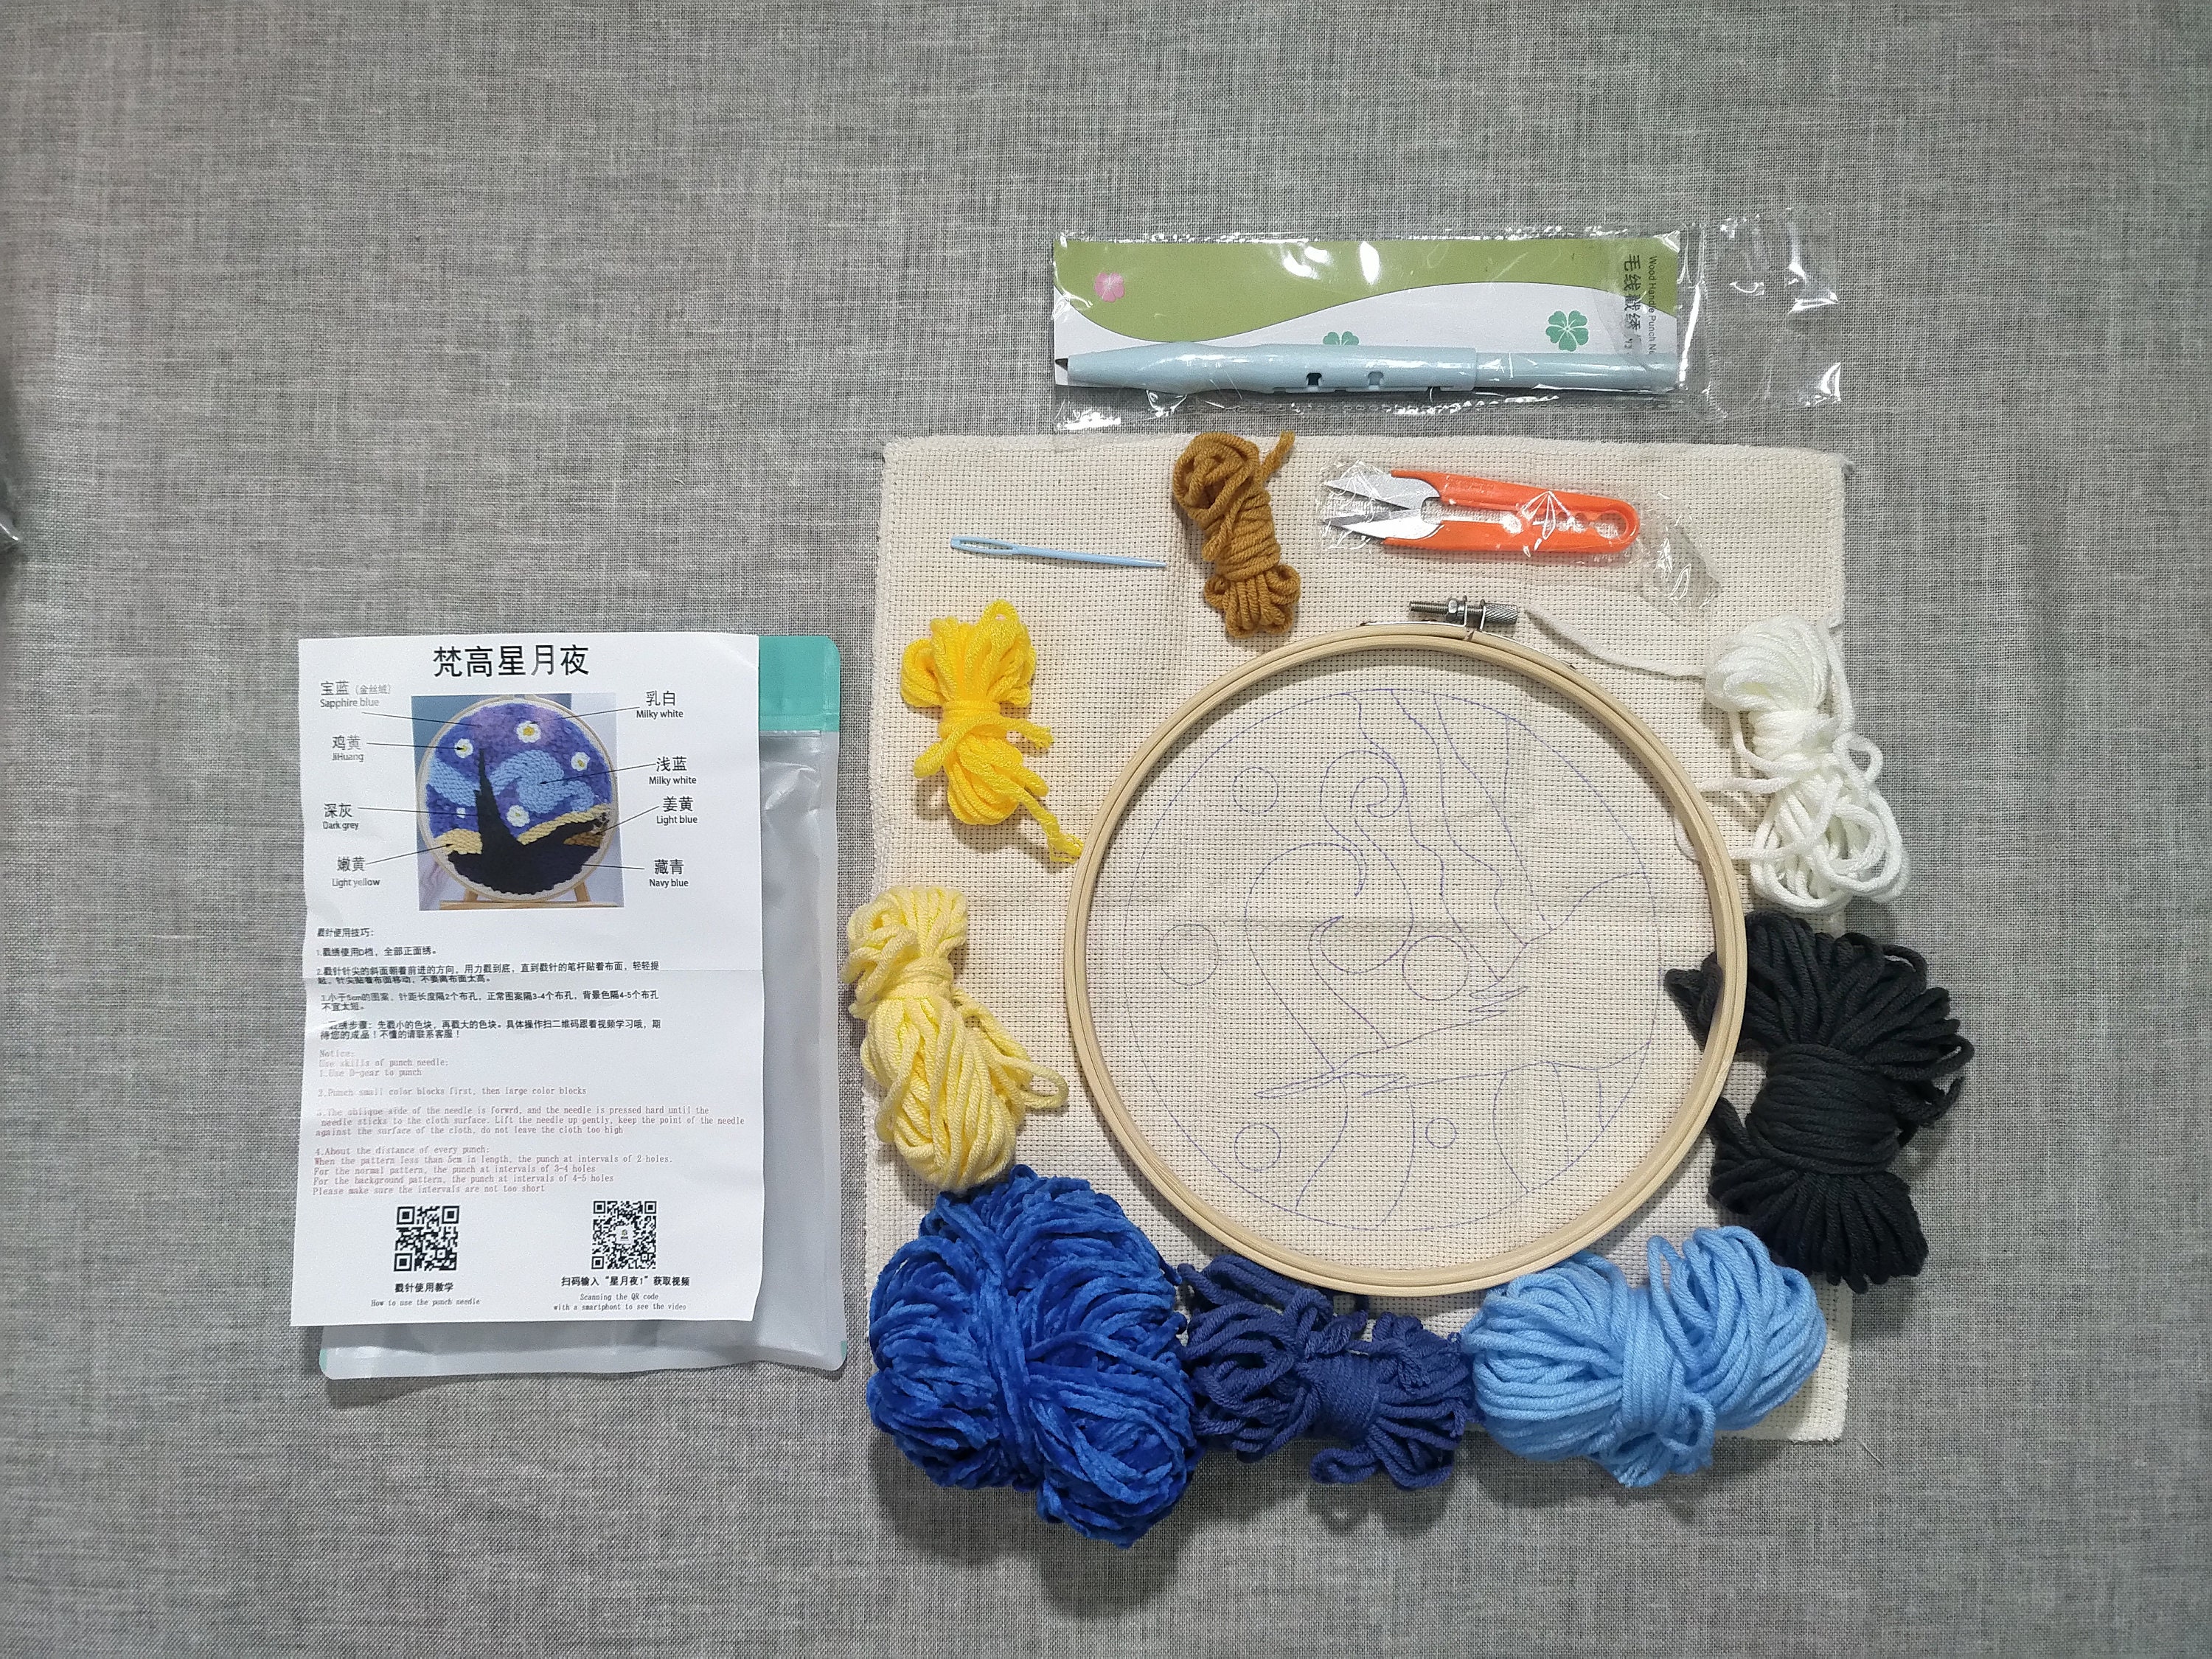 Exceart Punch Needle Embroidery Kits Punch Needle Tool Threader Fabric  Embroider